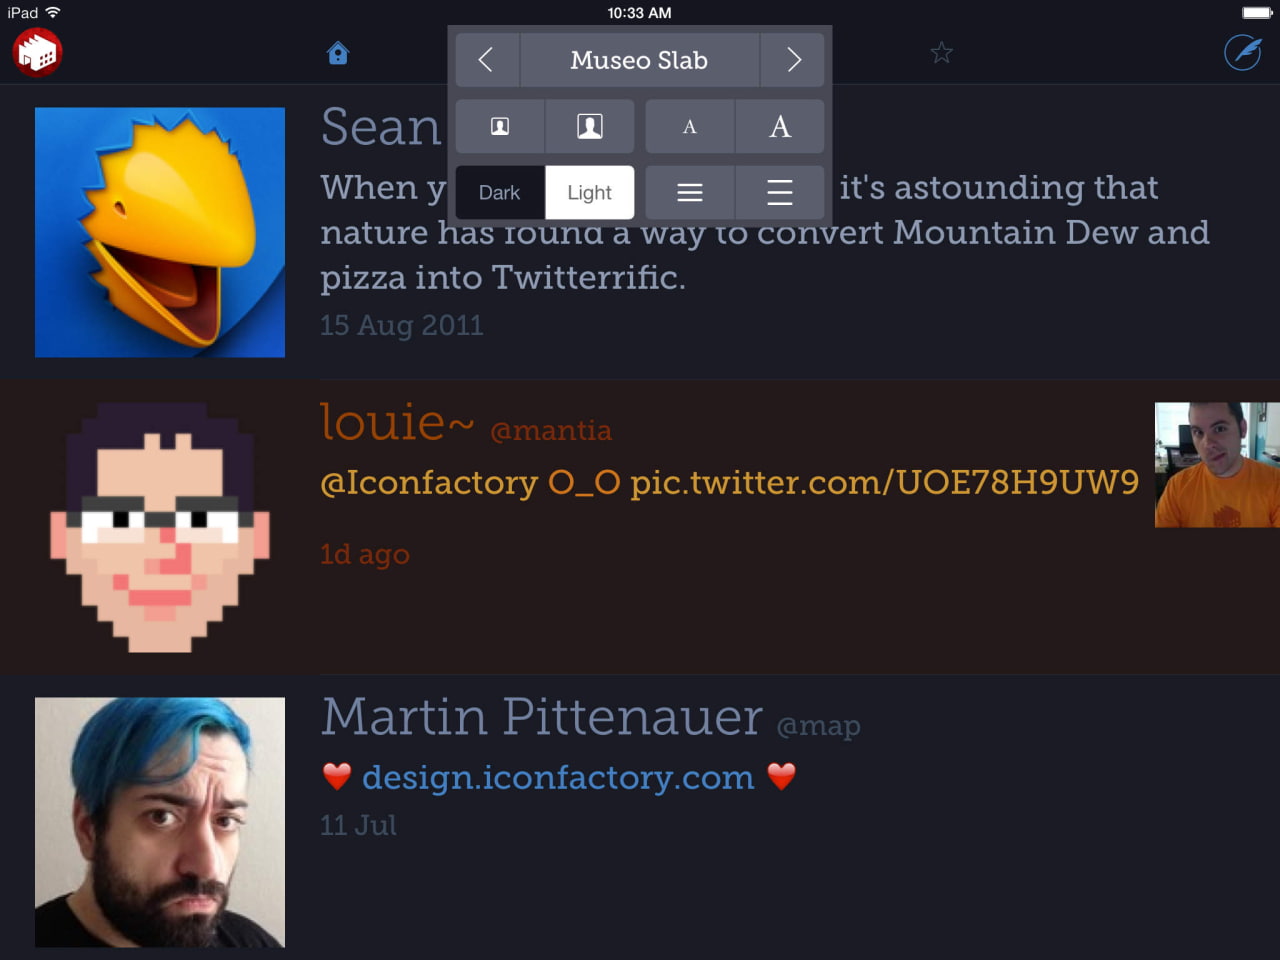 twitterrific app for android